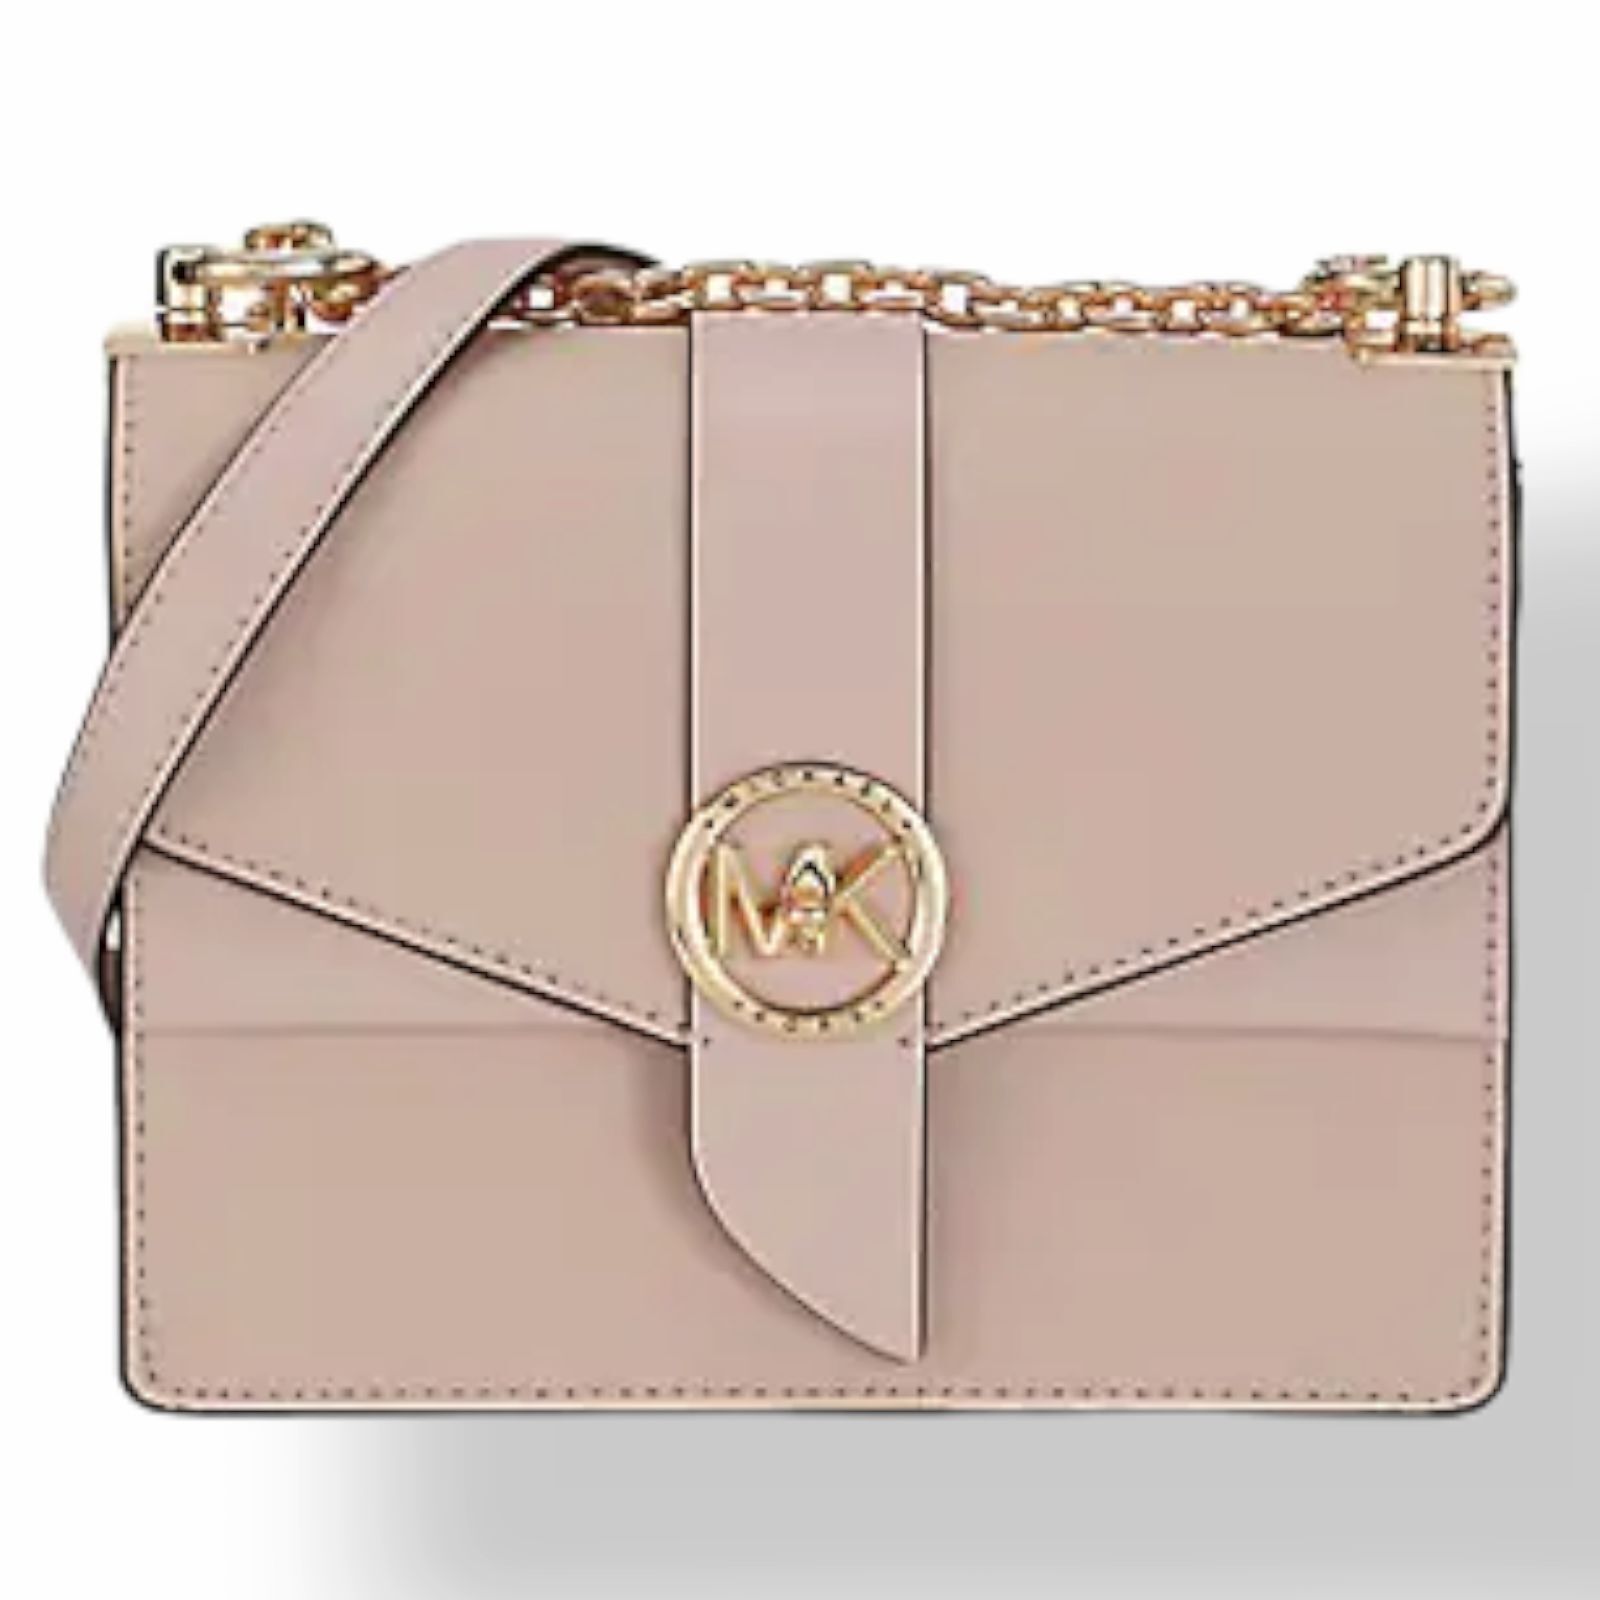 Michael Kors Extra-small Greenwich Crossbody Bag in Pink